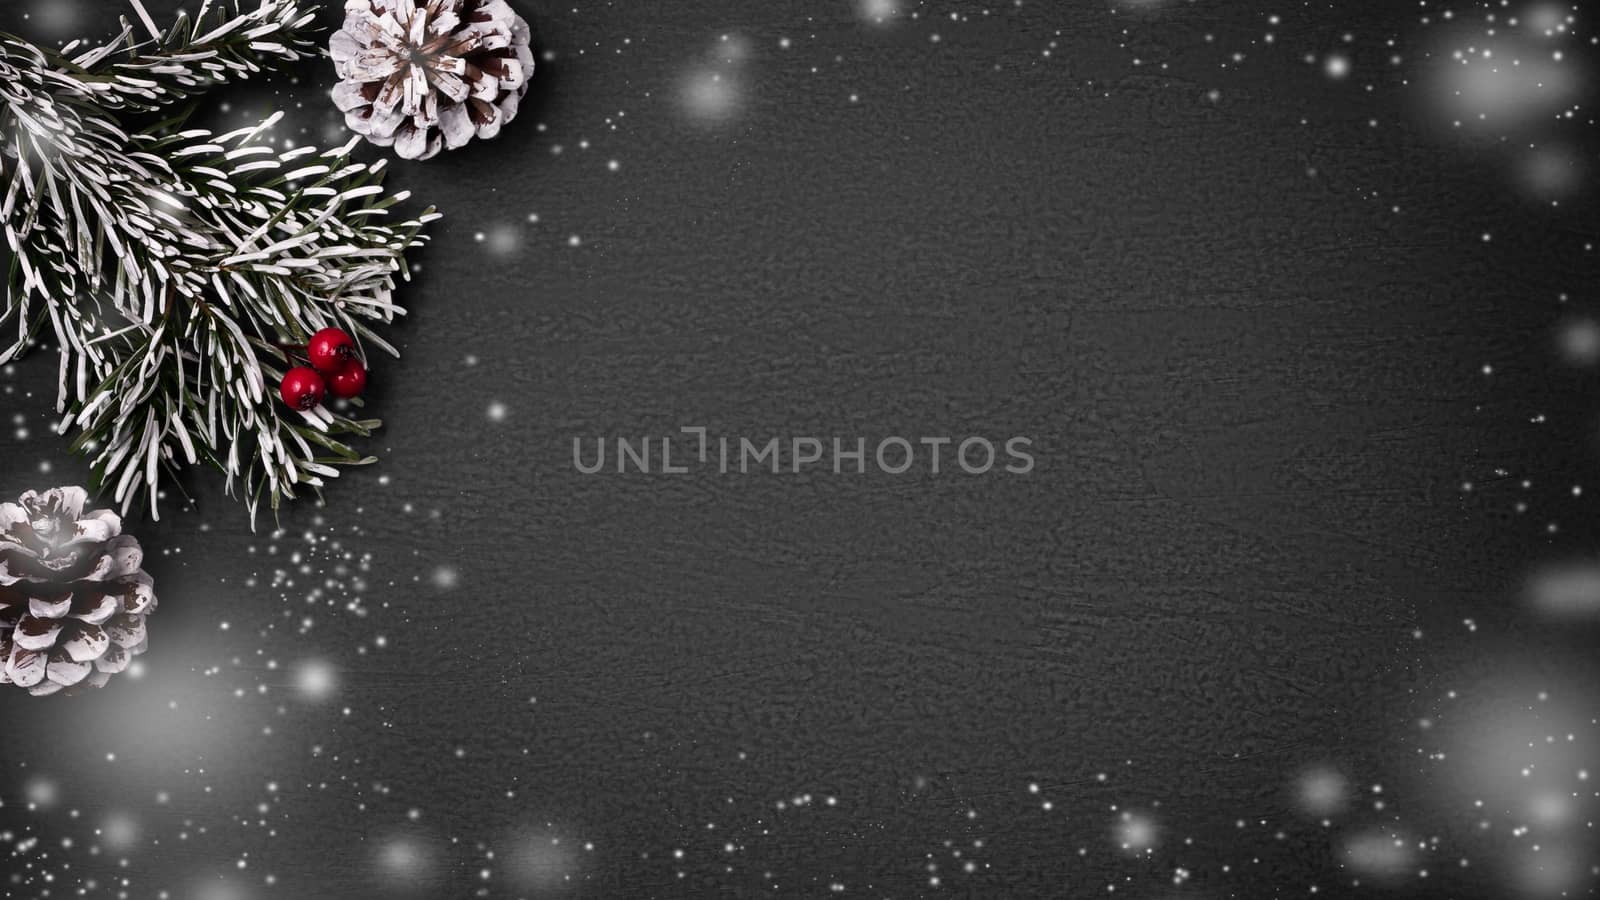 Christmas composition, blank for design - cones and decorations on a textured background, copy space, place for text.